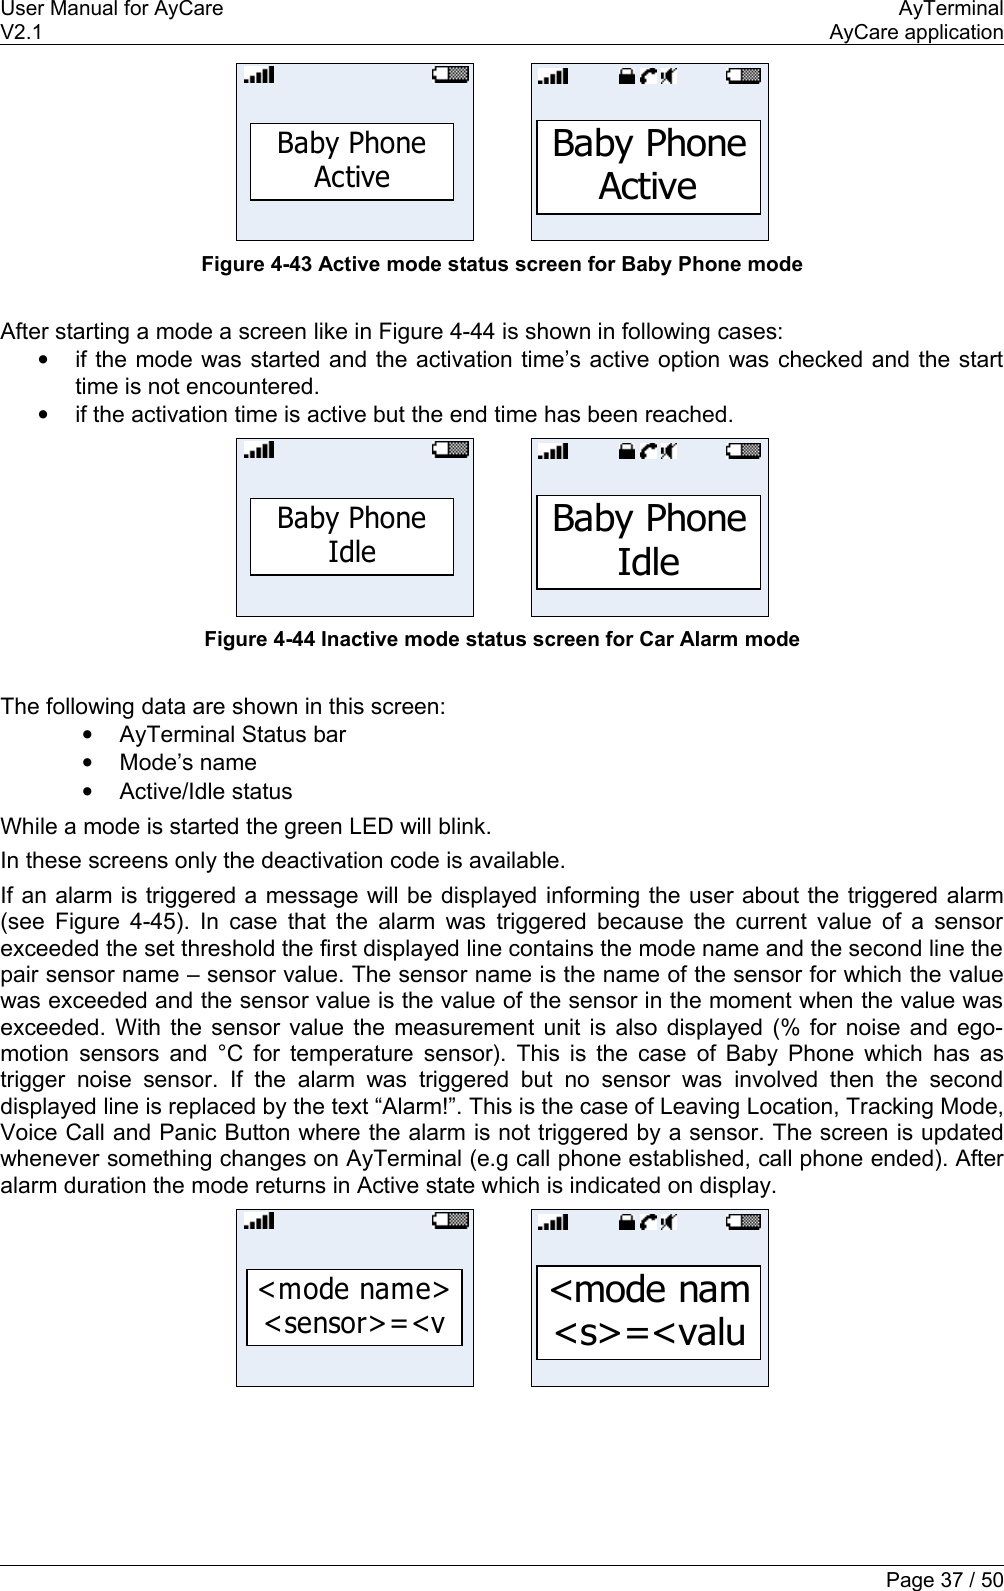 User Manual for AyCare AyTerminalV2.1 AyCare applicationBaby Phone ActiveBaby Phone ActiveFigure 4-43 Active mode status screen for Baby Phone modeAfter starting a mode a screen like in Figure 4-44 is shown in following cases:•if the mode was started and the activation time’s active option was checked and the start time is not encountered.•if the activation time is active but the end time has been reached.Baby PhoneIdleBaby Phone IdleFigure 4-44 Inactive mode status screen for Car Alarm modeThe following data are shown in this screen:•AyTerminal Status bar•Mode’s name•Active/Idle statusWhile a mode is started the green LED will blink.In these screens only the deactivation code is available.If an alarm is triggered a message will be displayed informing the user about the triggered alarm (see  Figure 4-45). In case that the alarm was triggered because the current value of a sensor exceeded the set threshold the first displayed line contains the mode name and the second line the pair sensor name – sensor value. The sensor name is the name of the sensor for which the value was exceeded and the sensor value is the value of the sensor in the moment when the value was exceeded. With the sensor value the measurement unit is also displayed (% for noise and ego-motion sensors and °C for temperature sensor). This is the case of Baby Phone which has as trigger noise sensor. If the   alarm was triggered but no sensor  was involved then the second displayed line is replaced by the text “Alarm!”. This is the case of Leaving Location, Tracking Mode, Voice Call and Panic Button where the alarm is not triggered by a sensor. The screen is updated whenever something changes on AyTerminal (e.g call phone established, call phone ended). After alarm duration the mode returns in Active state which is indicated on display.&lt;mode name&gt; &lt;sensor&gt;=&lt;v&lt;mode nam &lt;s&gt;=&lt;valuPage 37 / 50